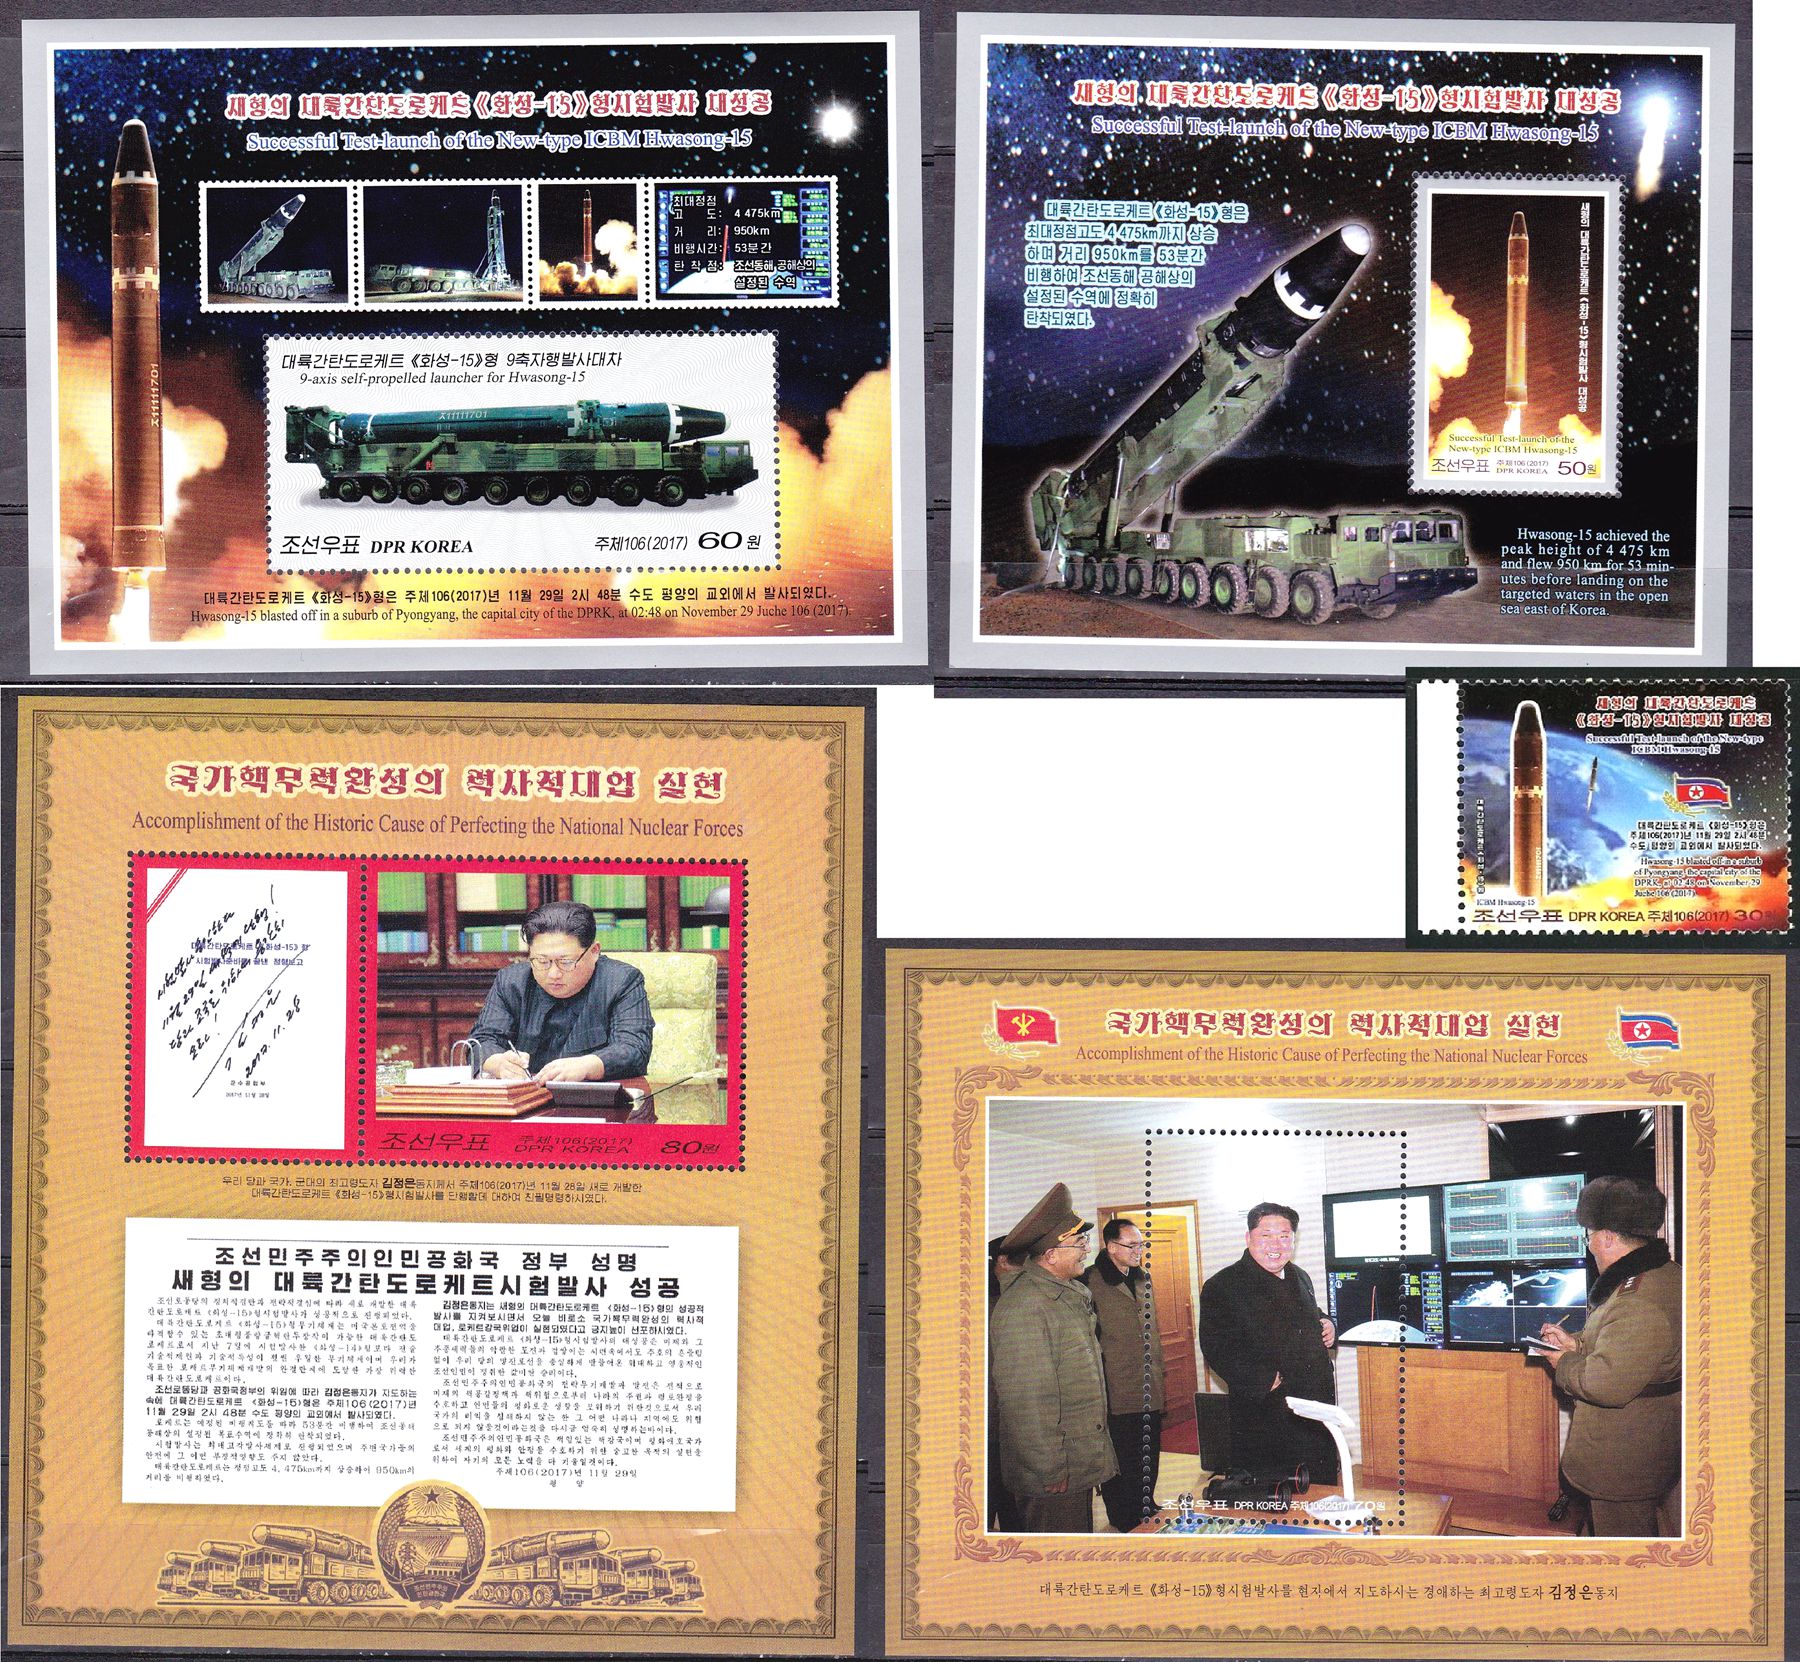 L9634, Korea "Launch Hwasong-15 Missile", 5 pcs First Day Cover Stamps, 2017 - Click Image to Close